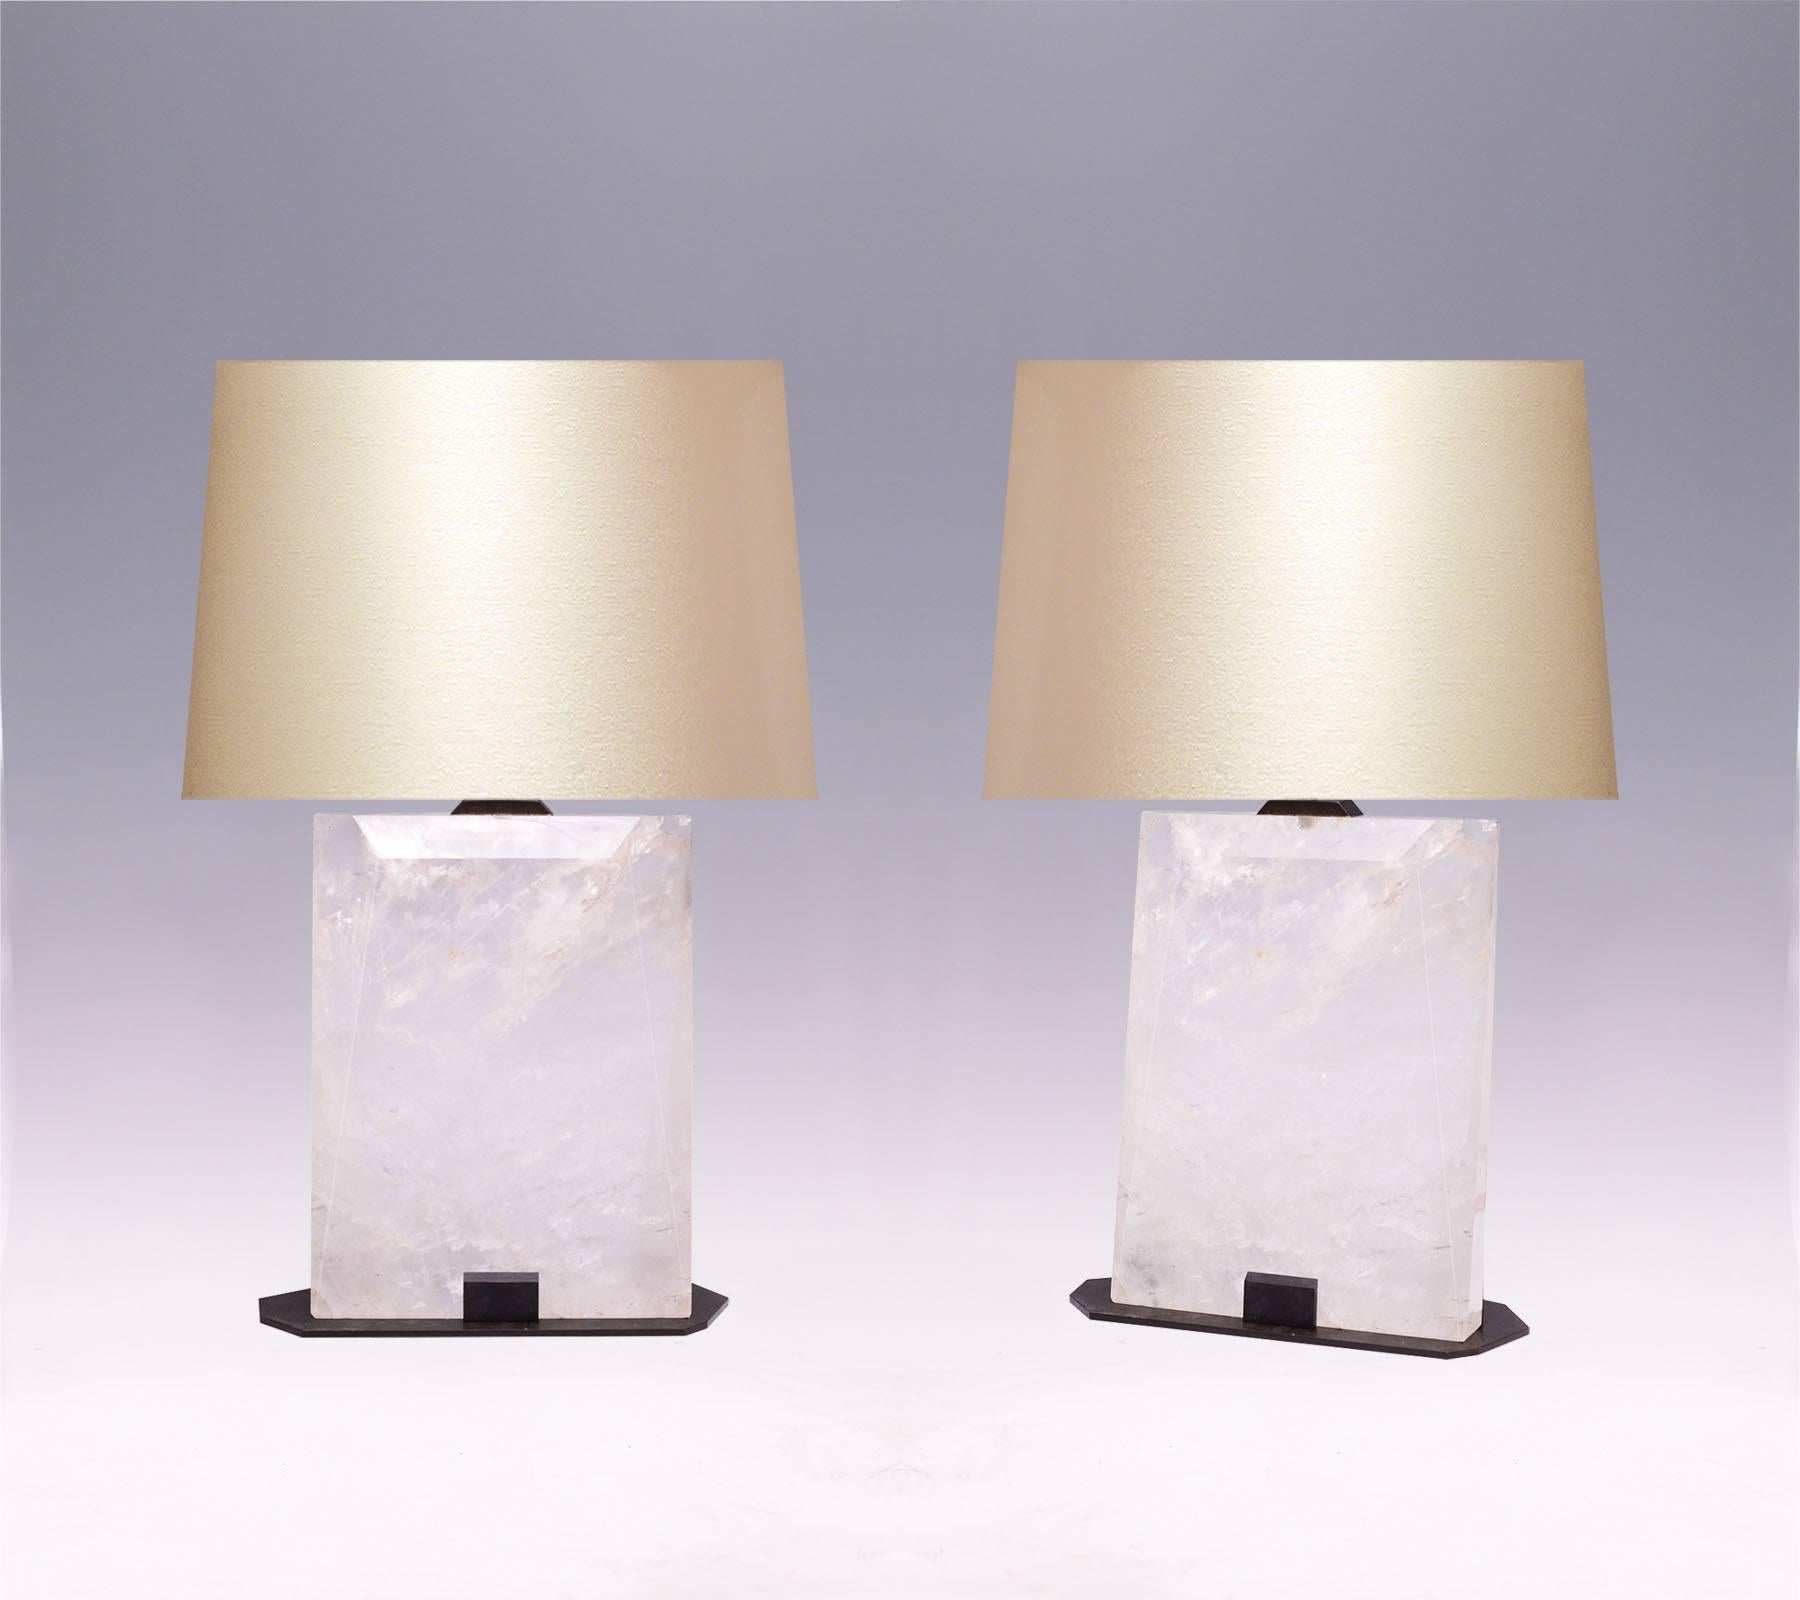 A pair of carved faceted block form rock crystal quartz lamps, created by phoenix gallery.
Measure: To the rock crystal 12